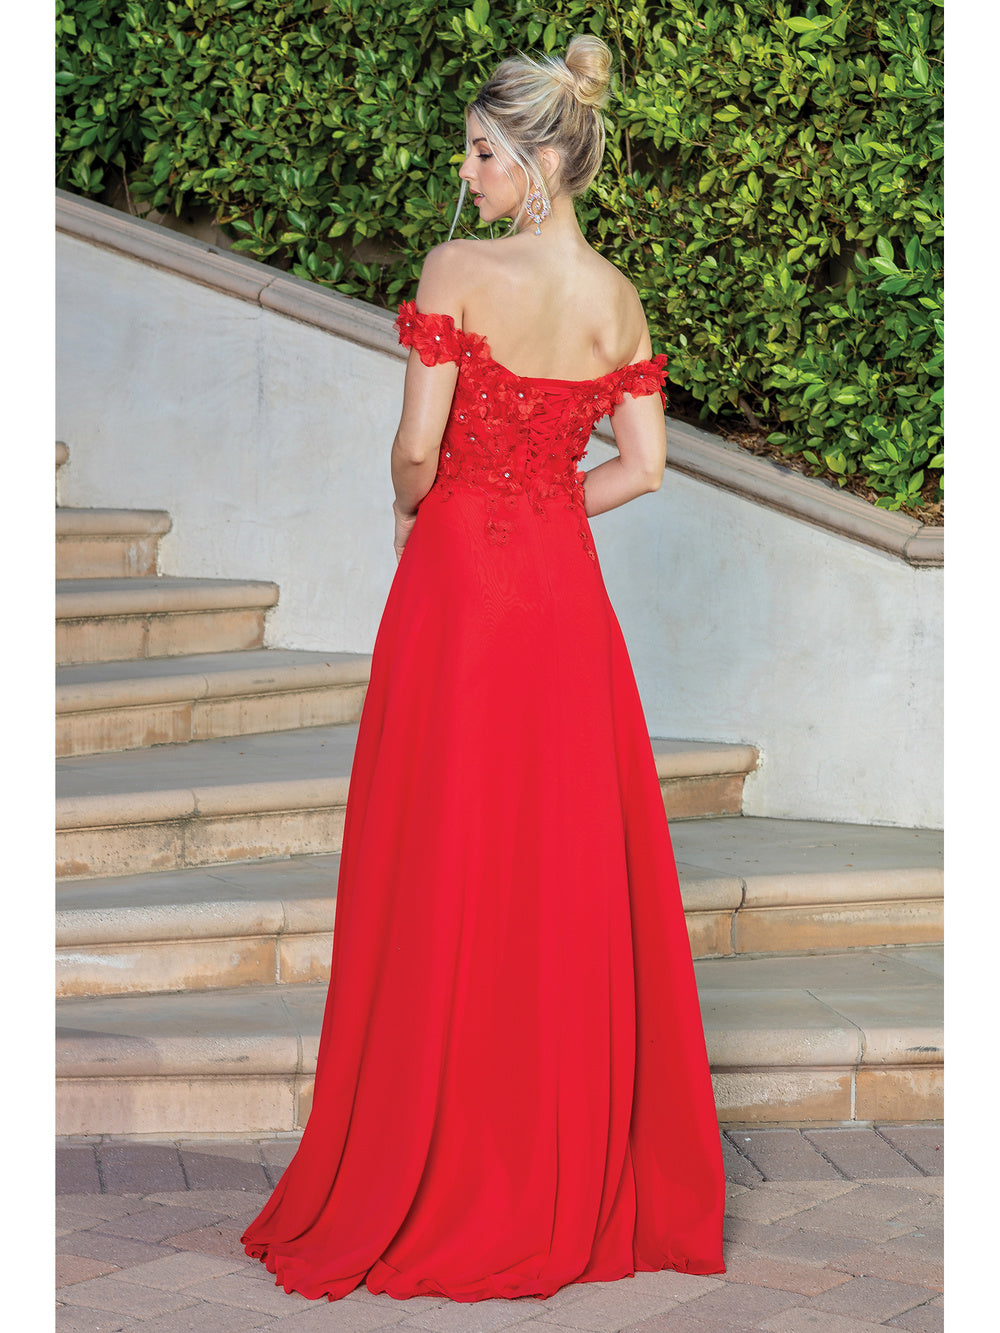 Thinyfull Sexy Red Mermaid Prom Evening Dresses Off The Shoulder Party Dress  Long Slereve Floor Length Cocktail Gowns Plus Size - Prom Dresses -  AliExpress